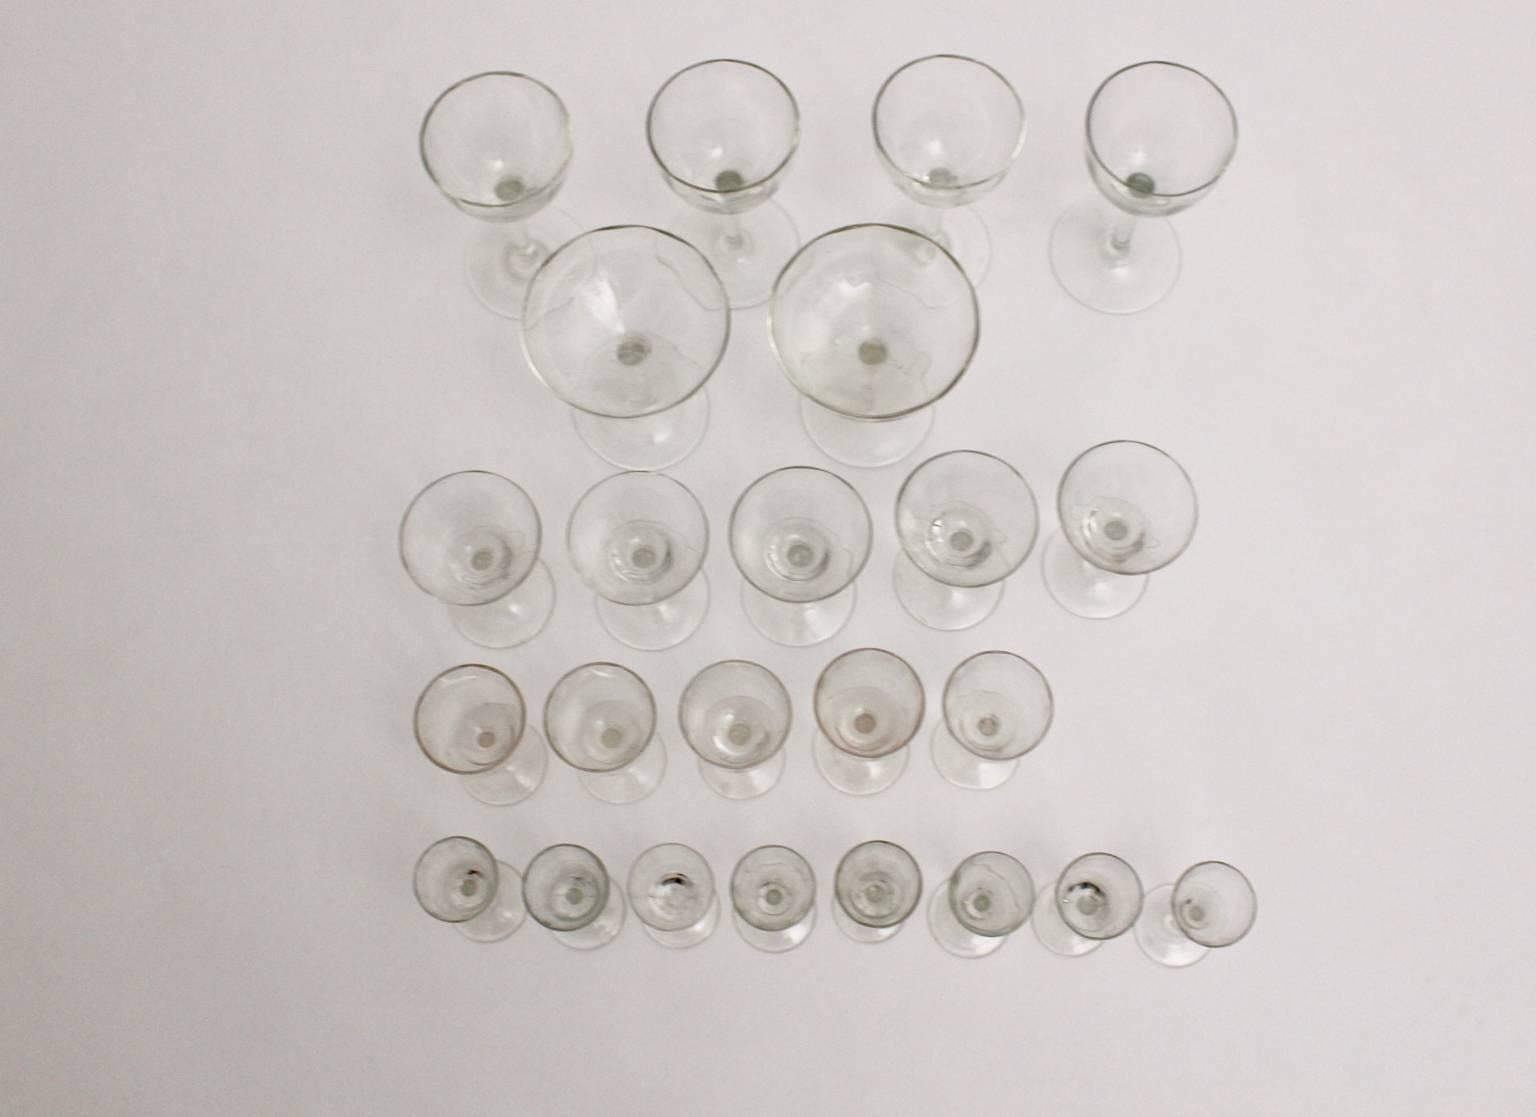 Jugendstil glassware or barware designed and manufactured in Vienna circa 1910.
A best quality sophisticated convolute of clear glassware consists of 24 pieces colorless handblown stem glasses in very good condition without chips or spots.
This